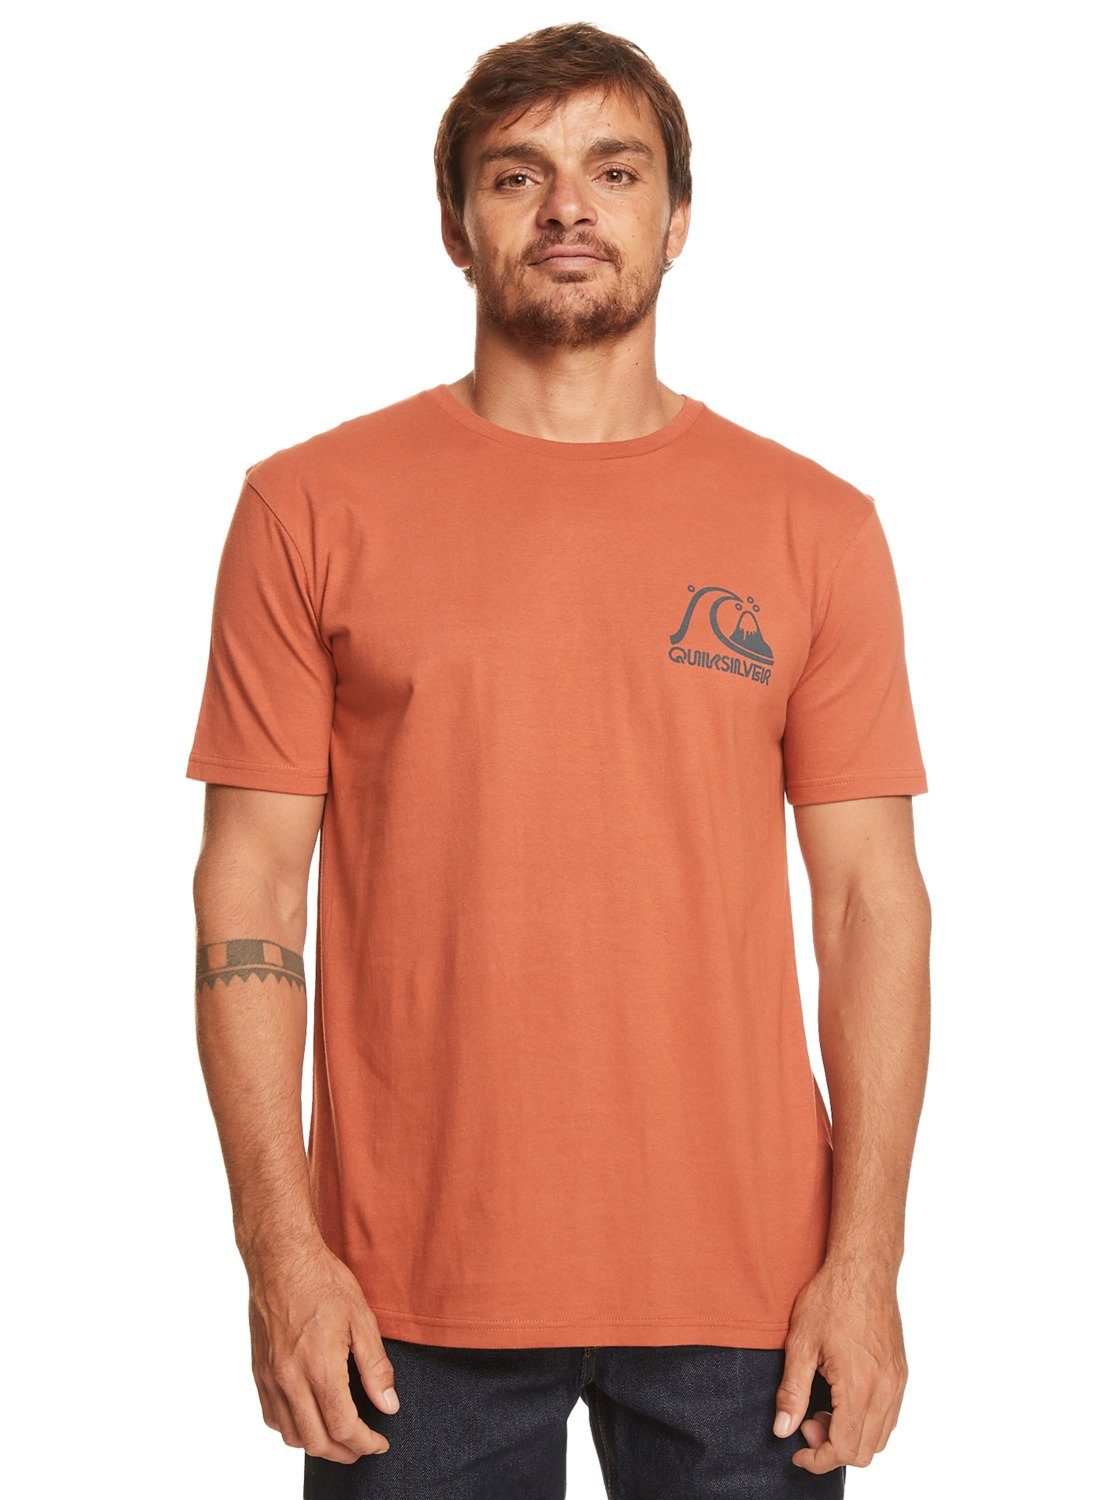 Quiksilver T-Shirt The Original Baked Clay